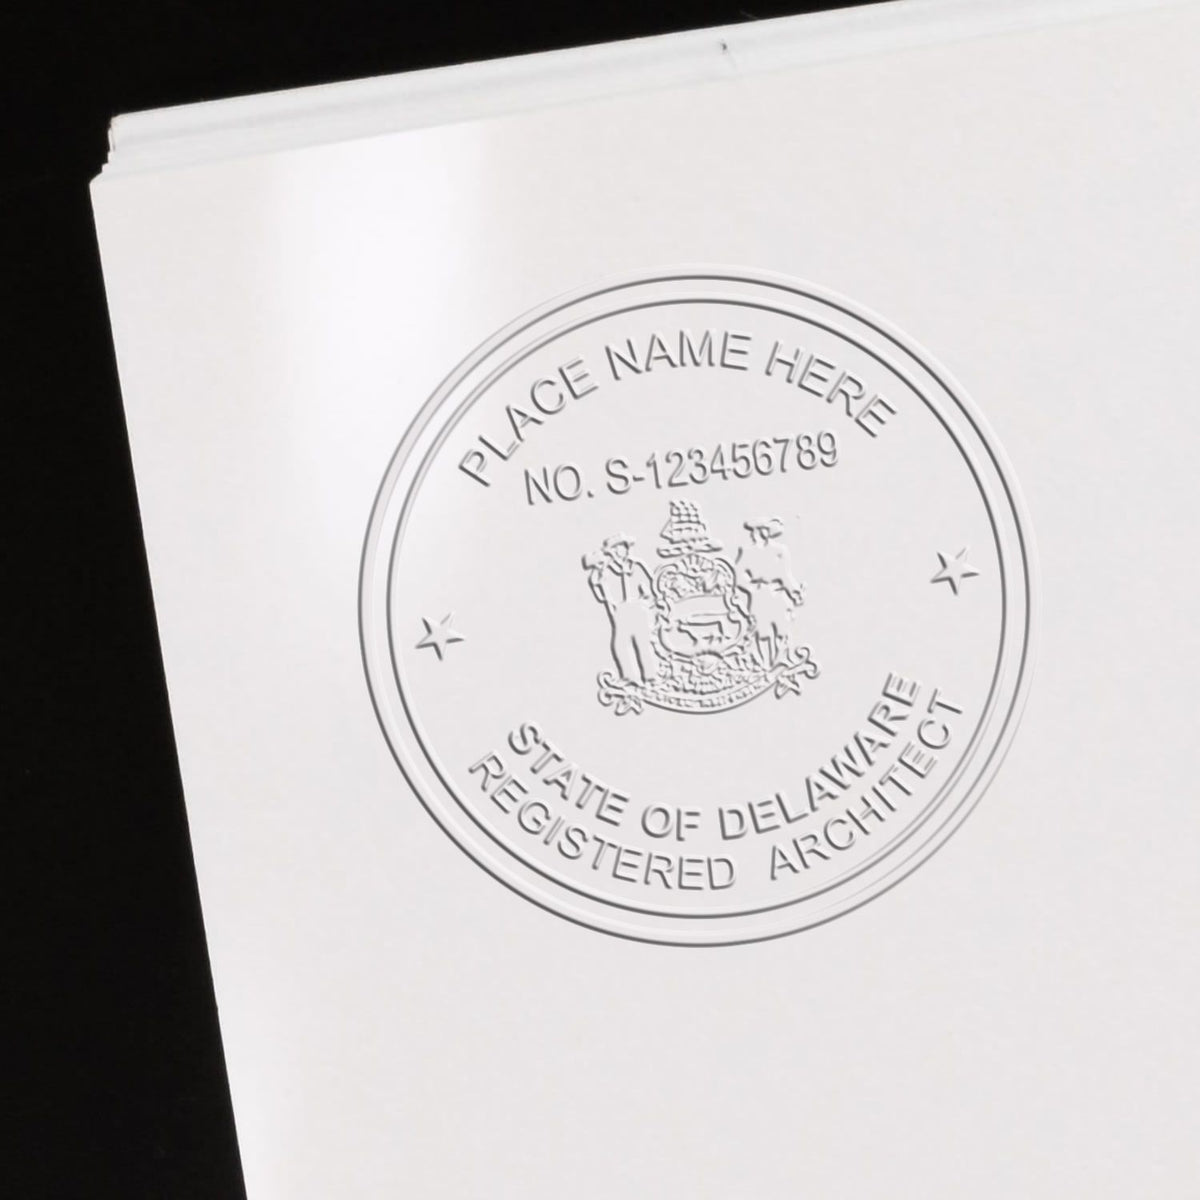 An alternative view of the State of Delaware Long Reach Architectural Embossing Seal stamped on a sheet of paper showing the image in use